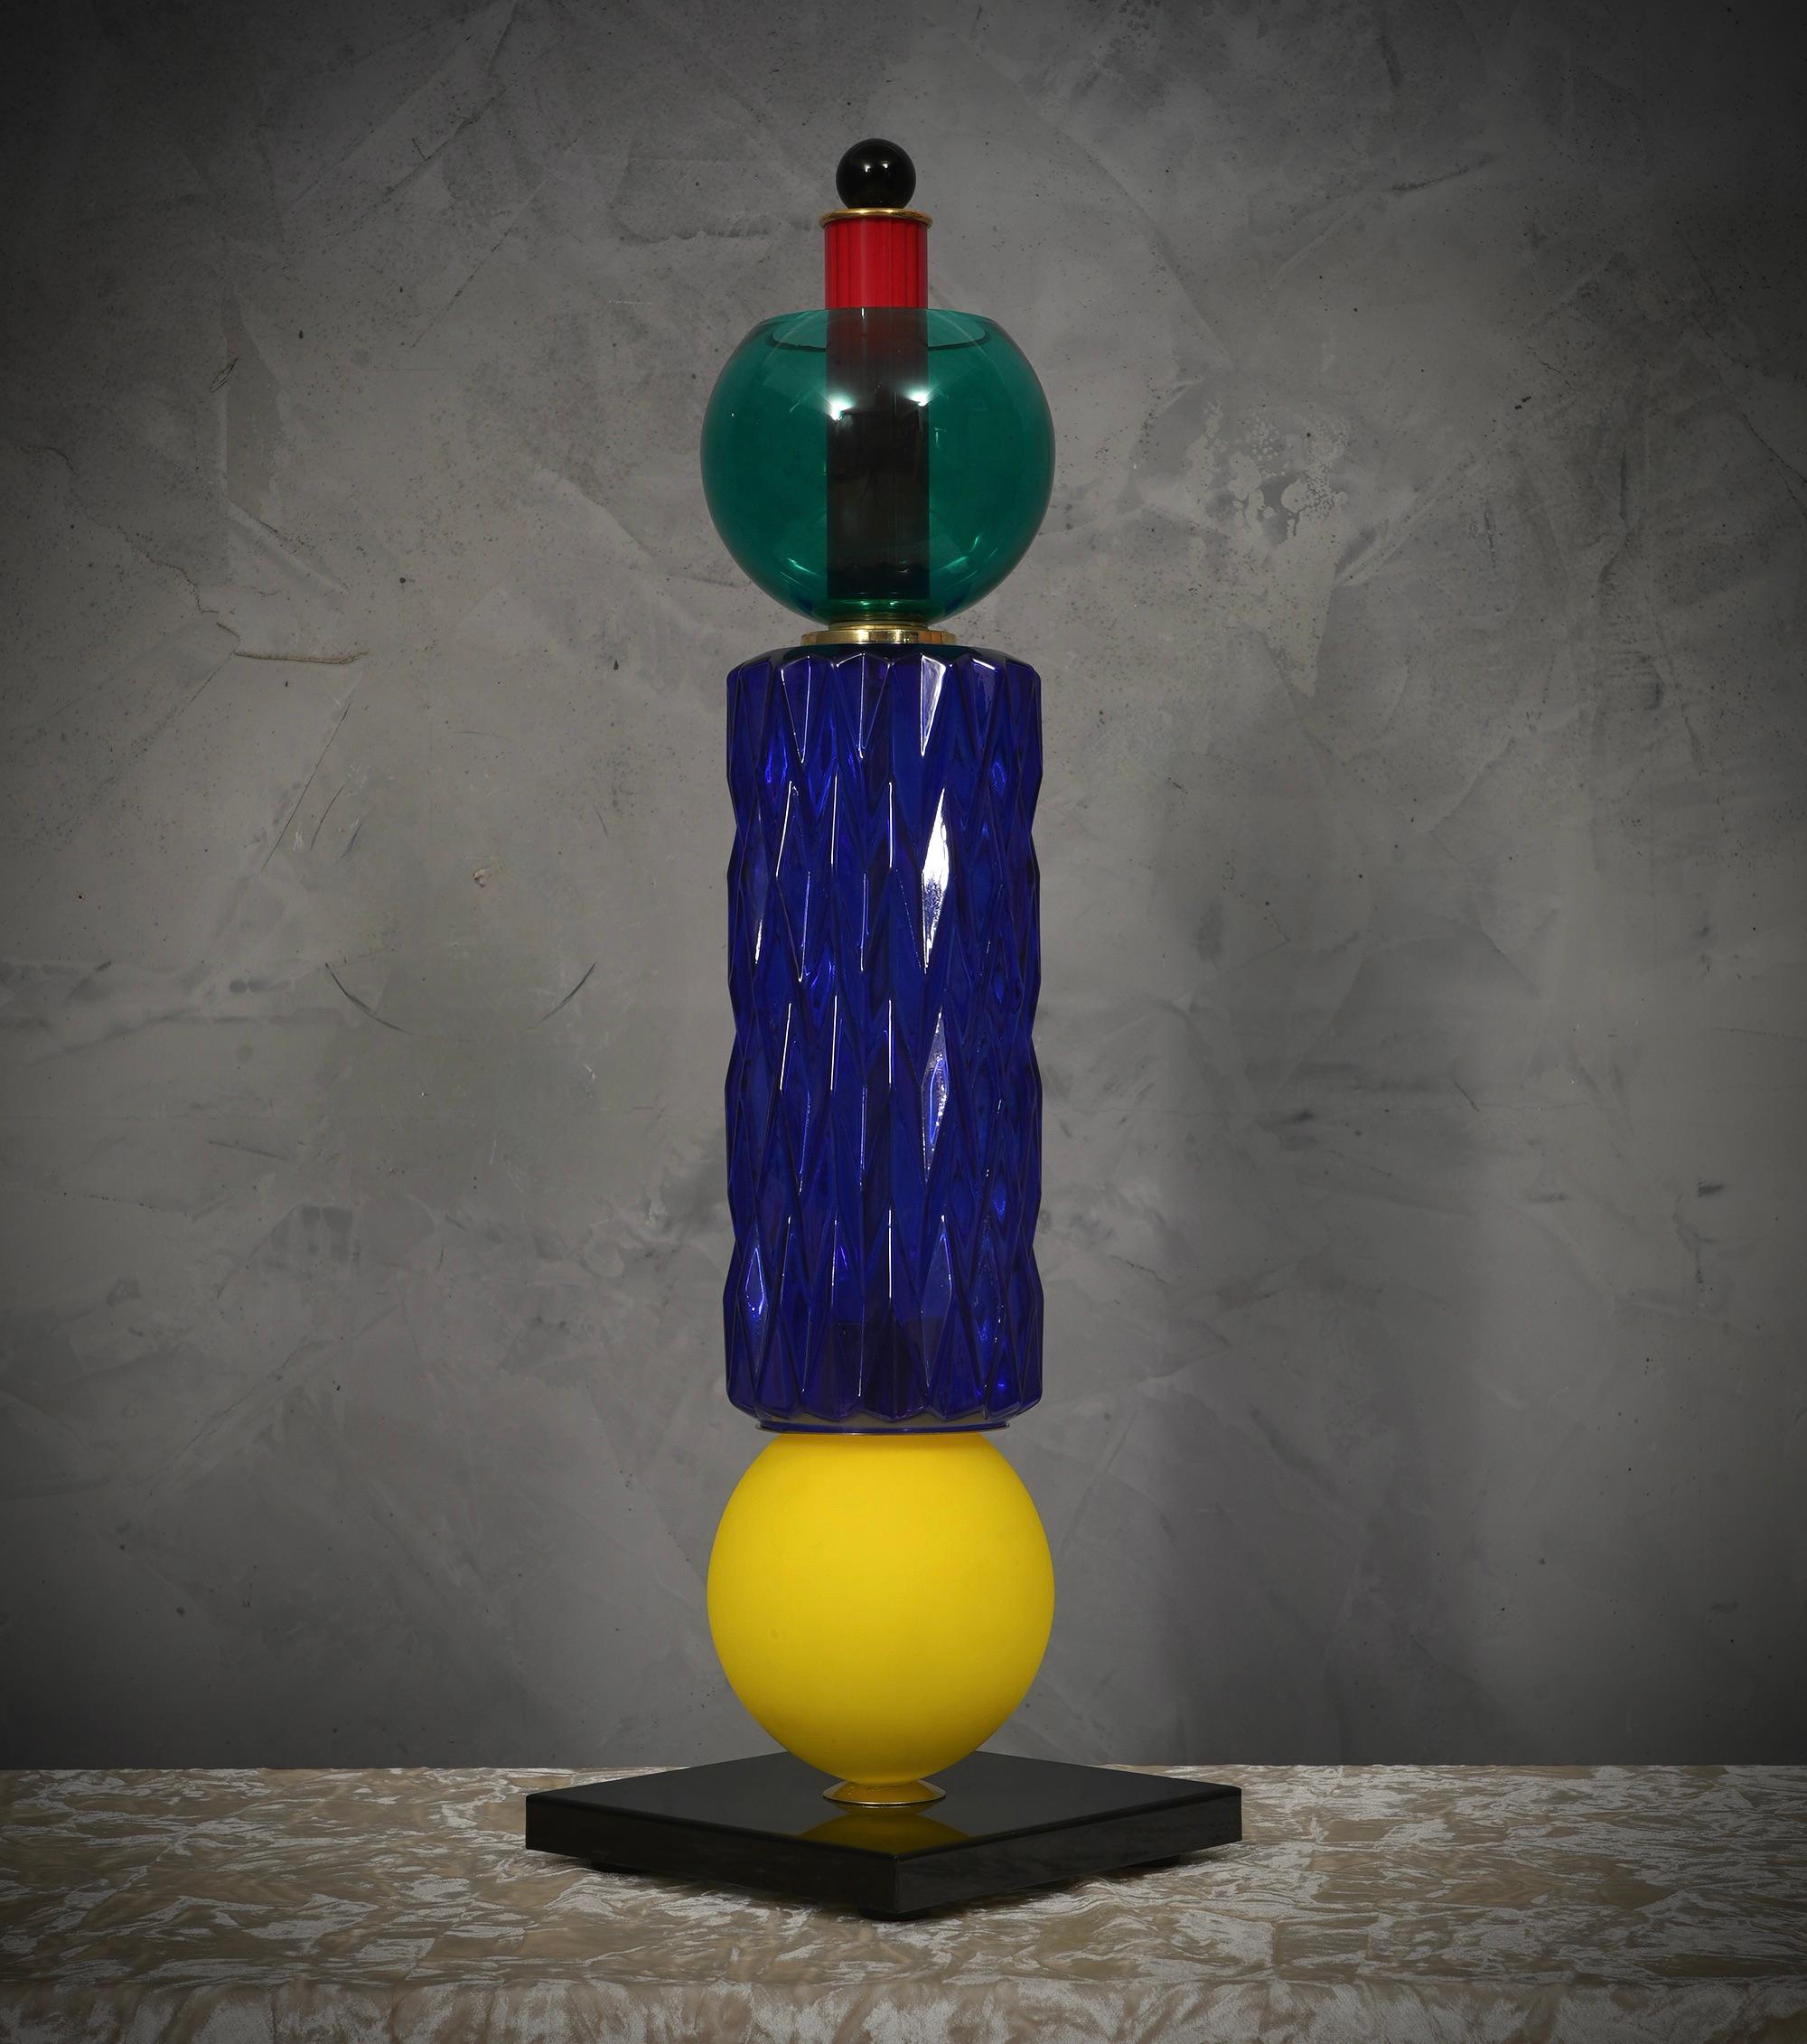 Precious and unique hand-blown multicolored Murano lamp, classic but original design with a strong contrast between the colors of the various glass pieces.

The lamp is characterized by an elegant, refined and linear design. It is composed of a